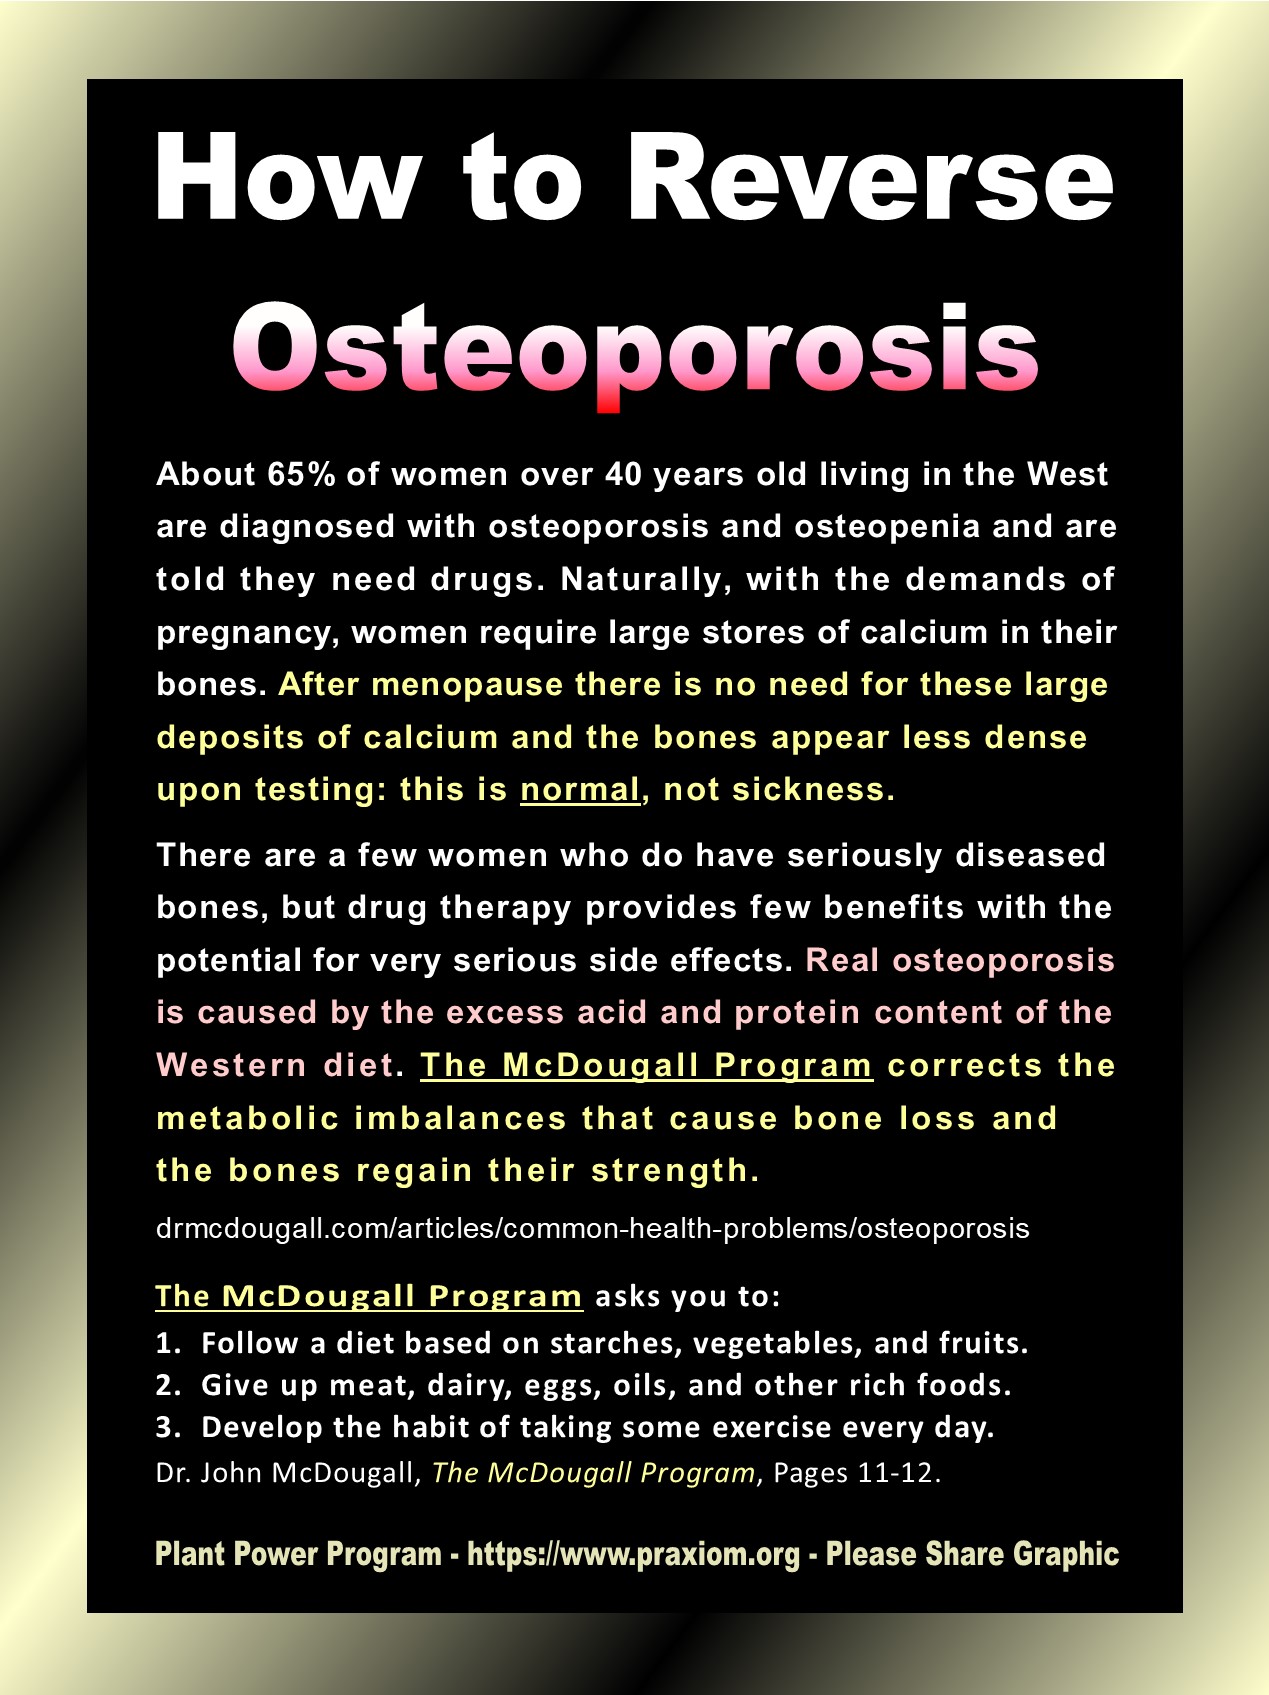 How to Reverse Osteoporosis - Dr. John McDougall